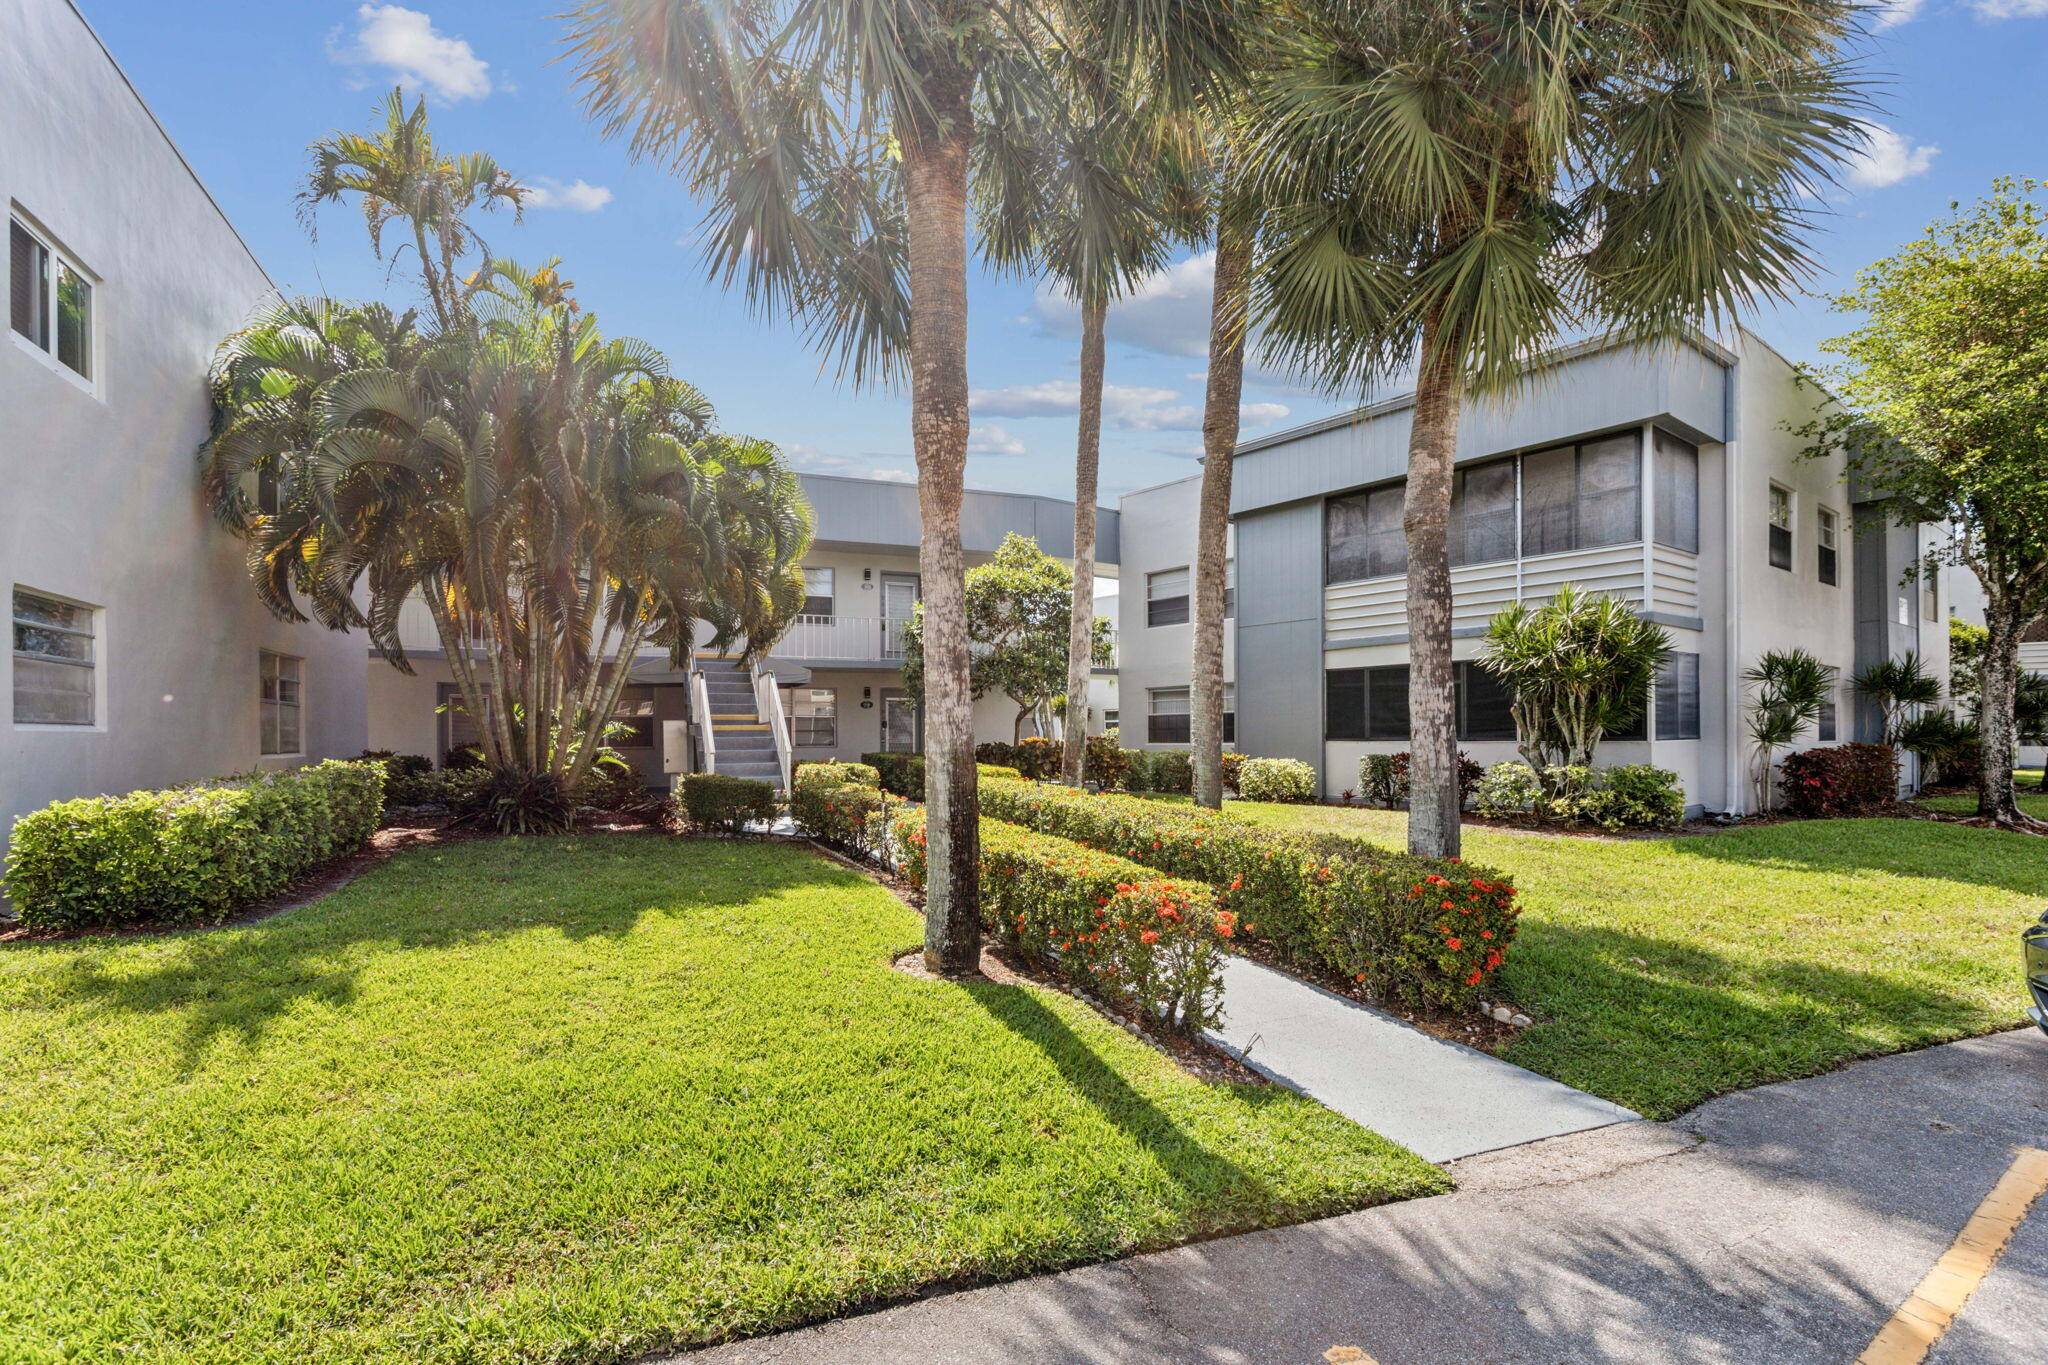 Embrace serenity and sophistication in this exquisite 2 bedroom, 2 bathroom condo nestled within the prestigious Kings Point community of Delray Beach.